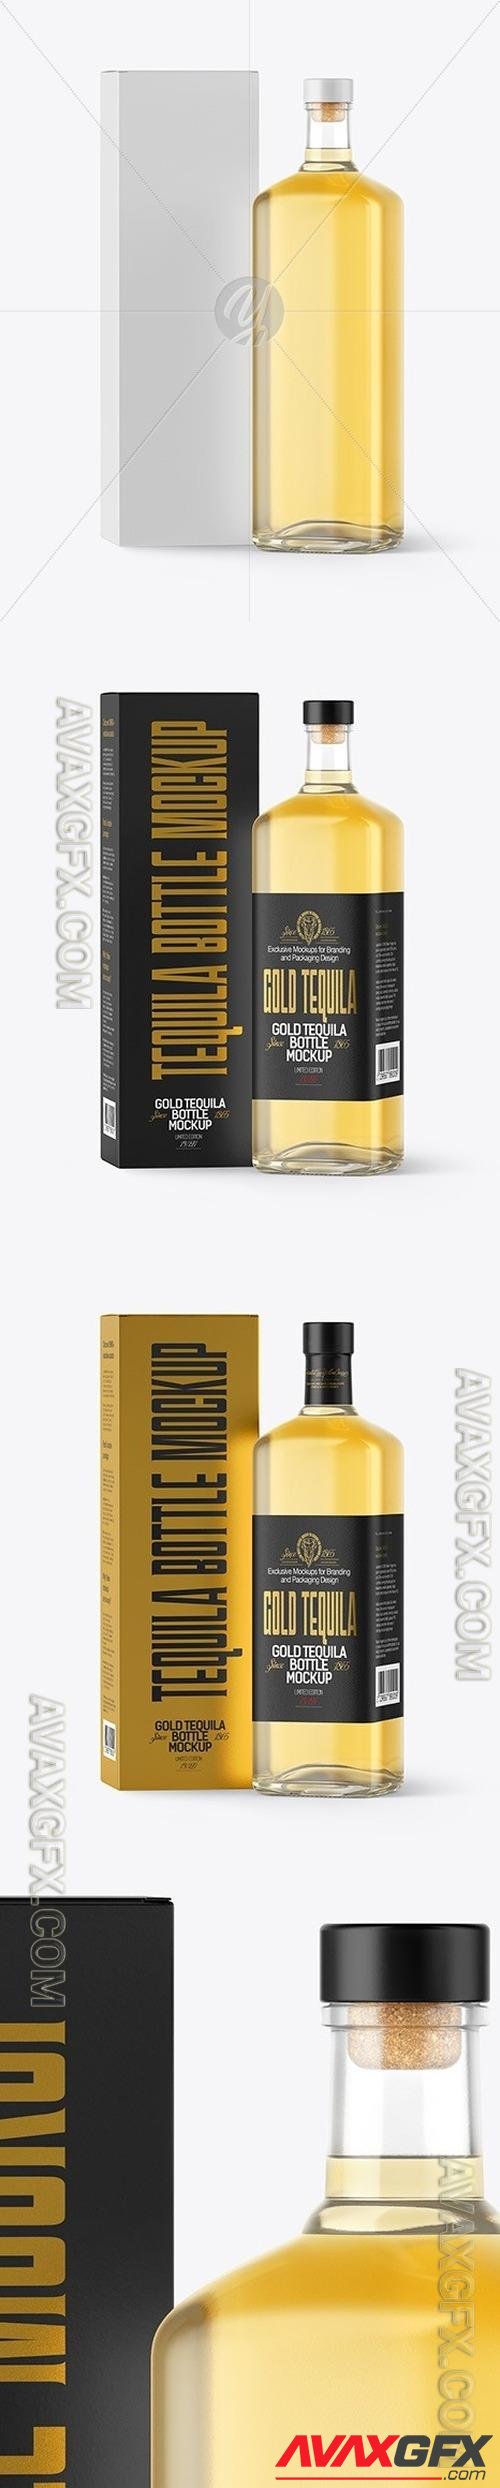 Golden Tequila Bottle with Box Mockup 53587 TIF